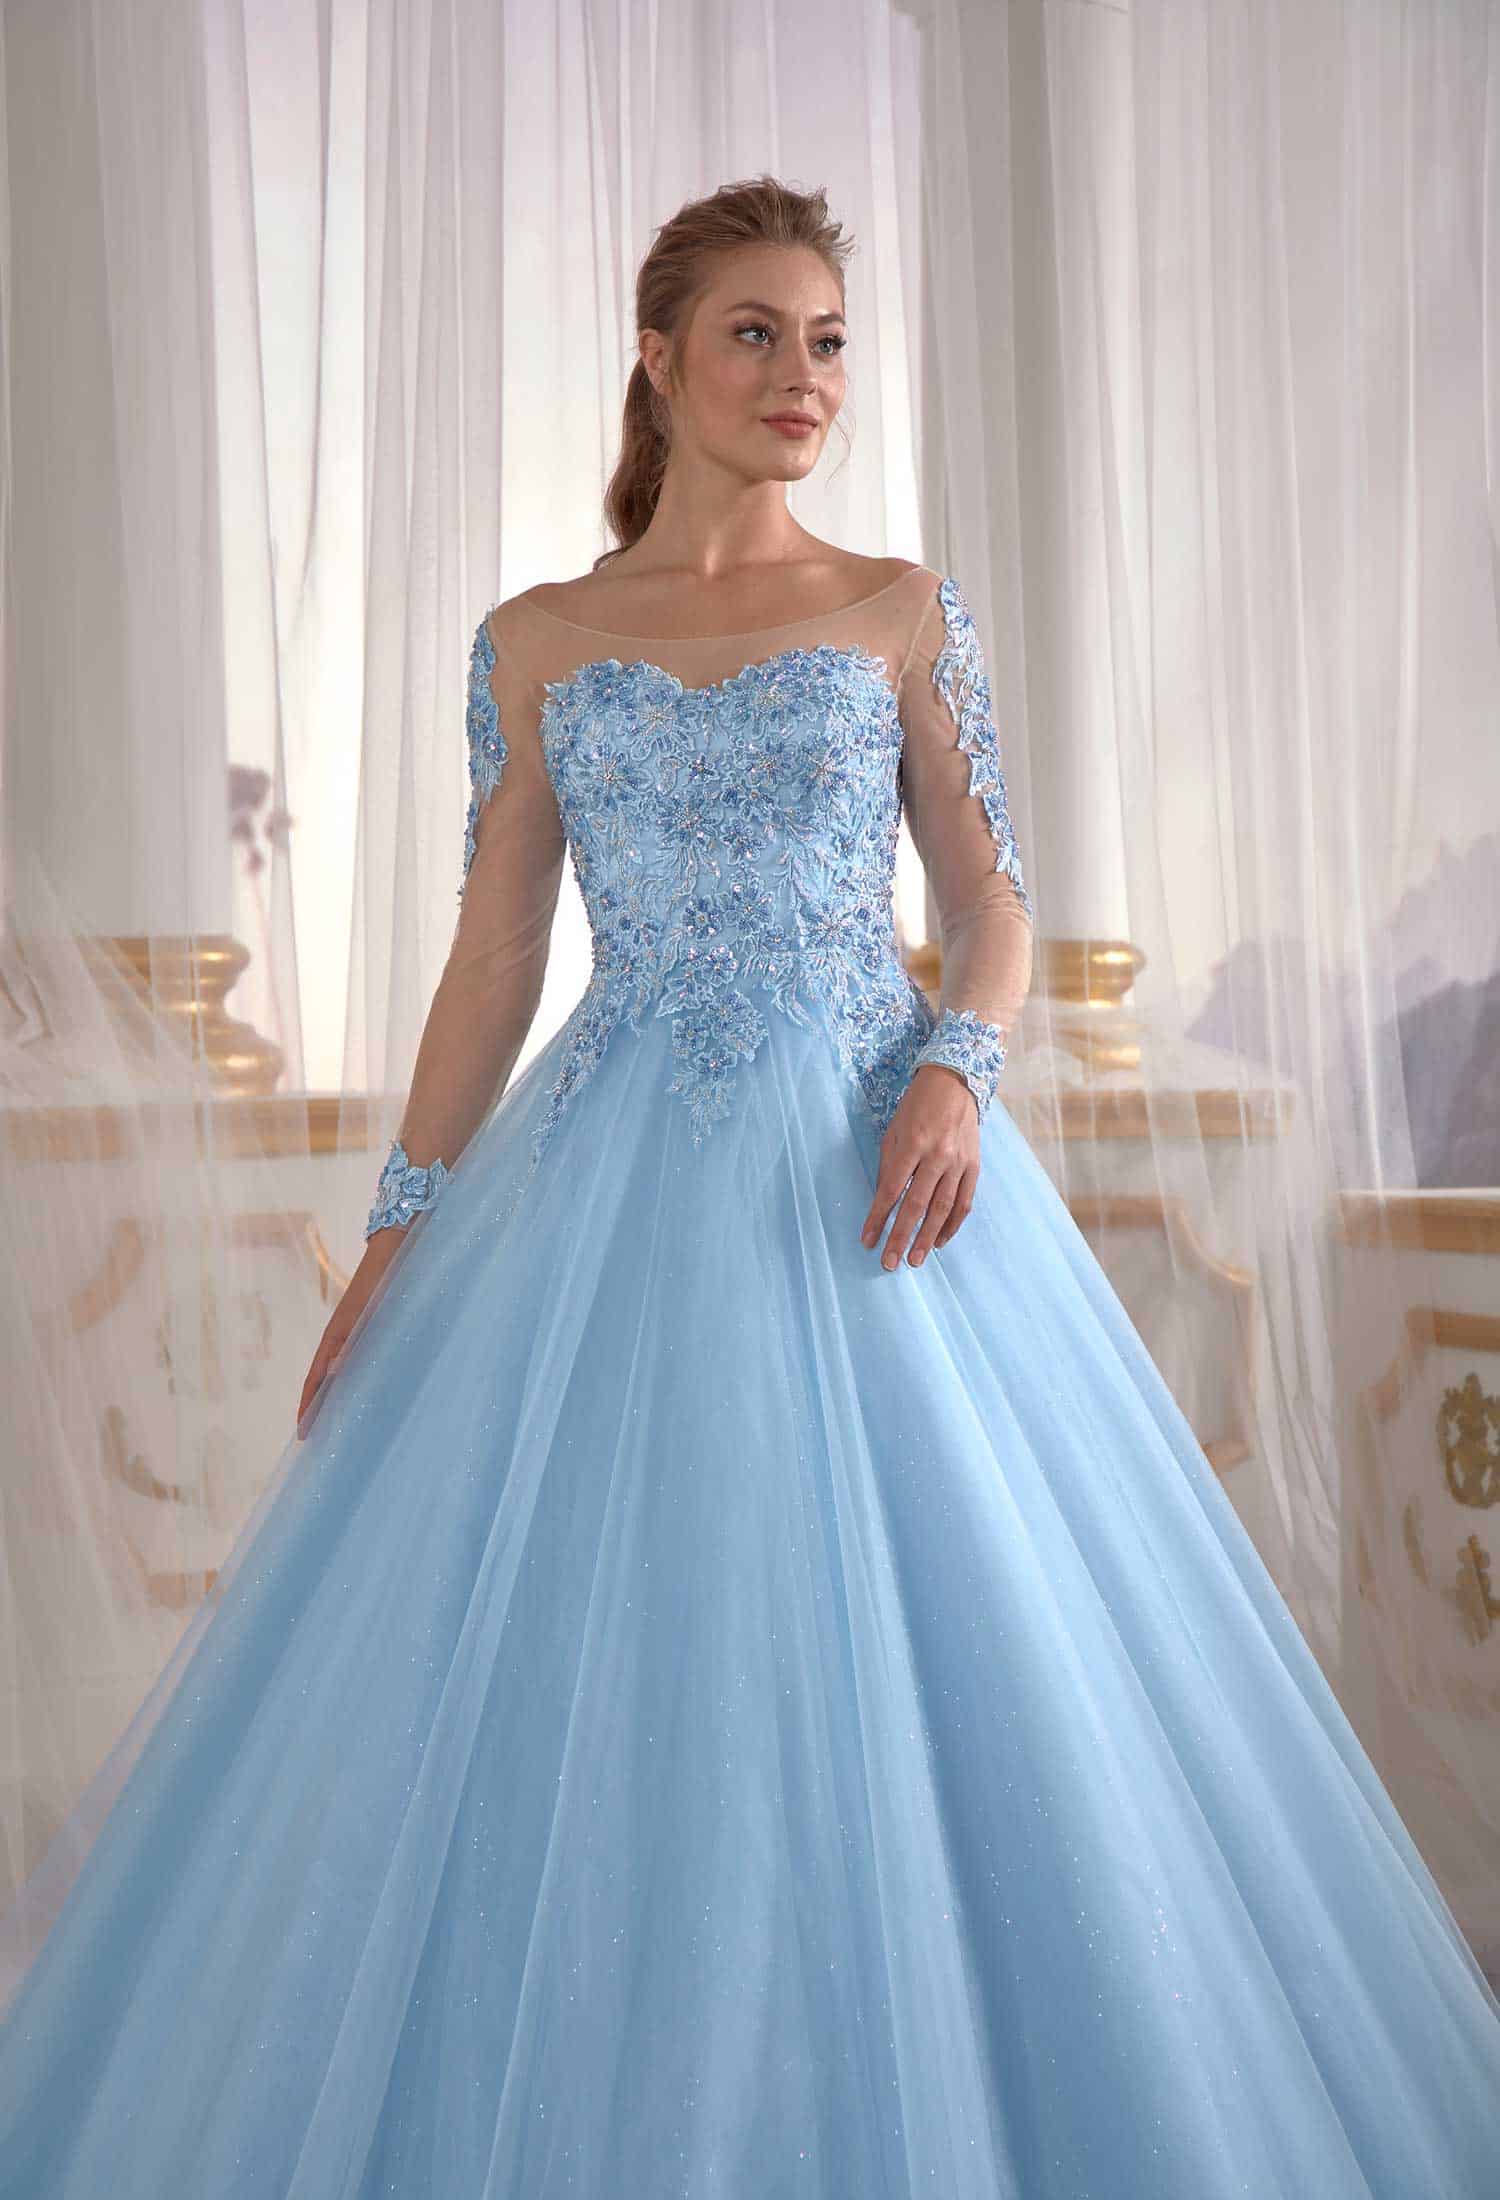 gown dresses online shopping İce Blue Tulle Engagement Dress Pleated Open Back Embellished Top Detail Cold Shoulder (2)